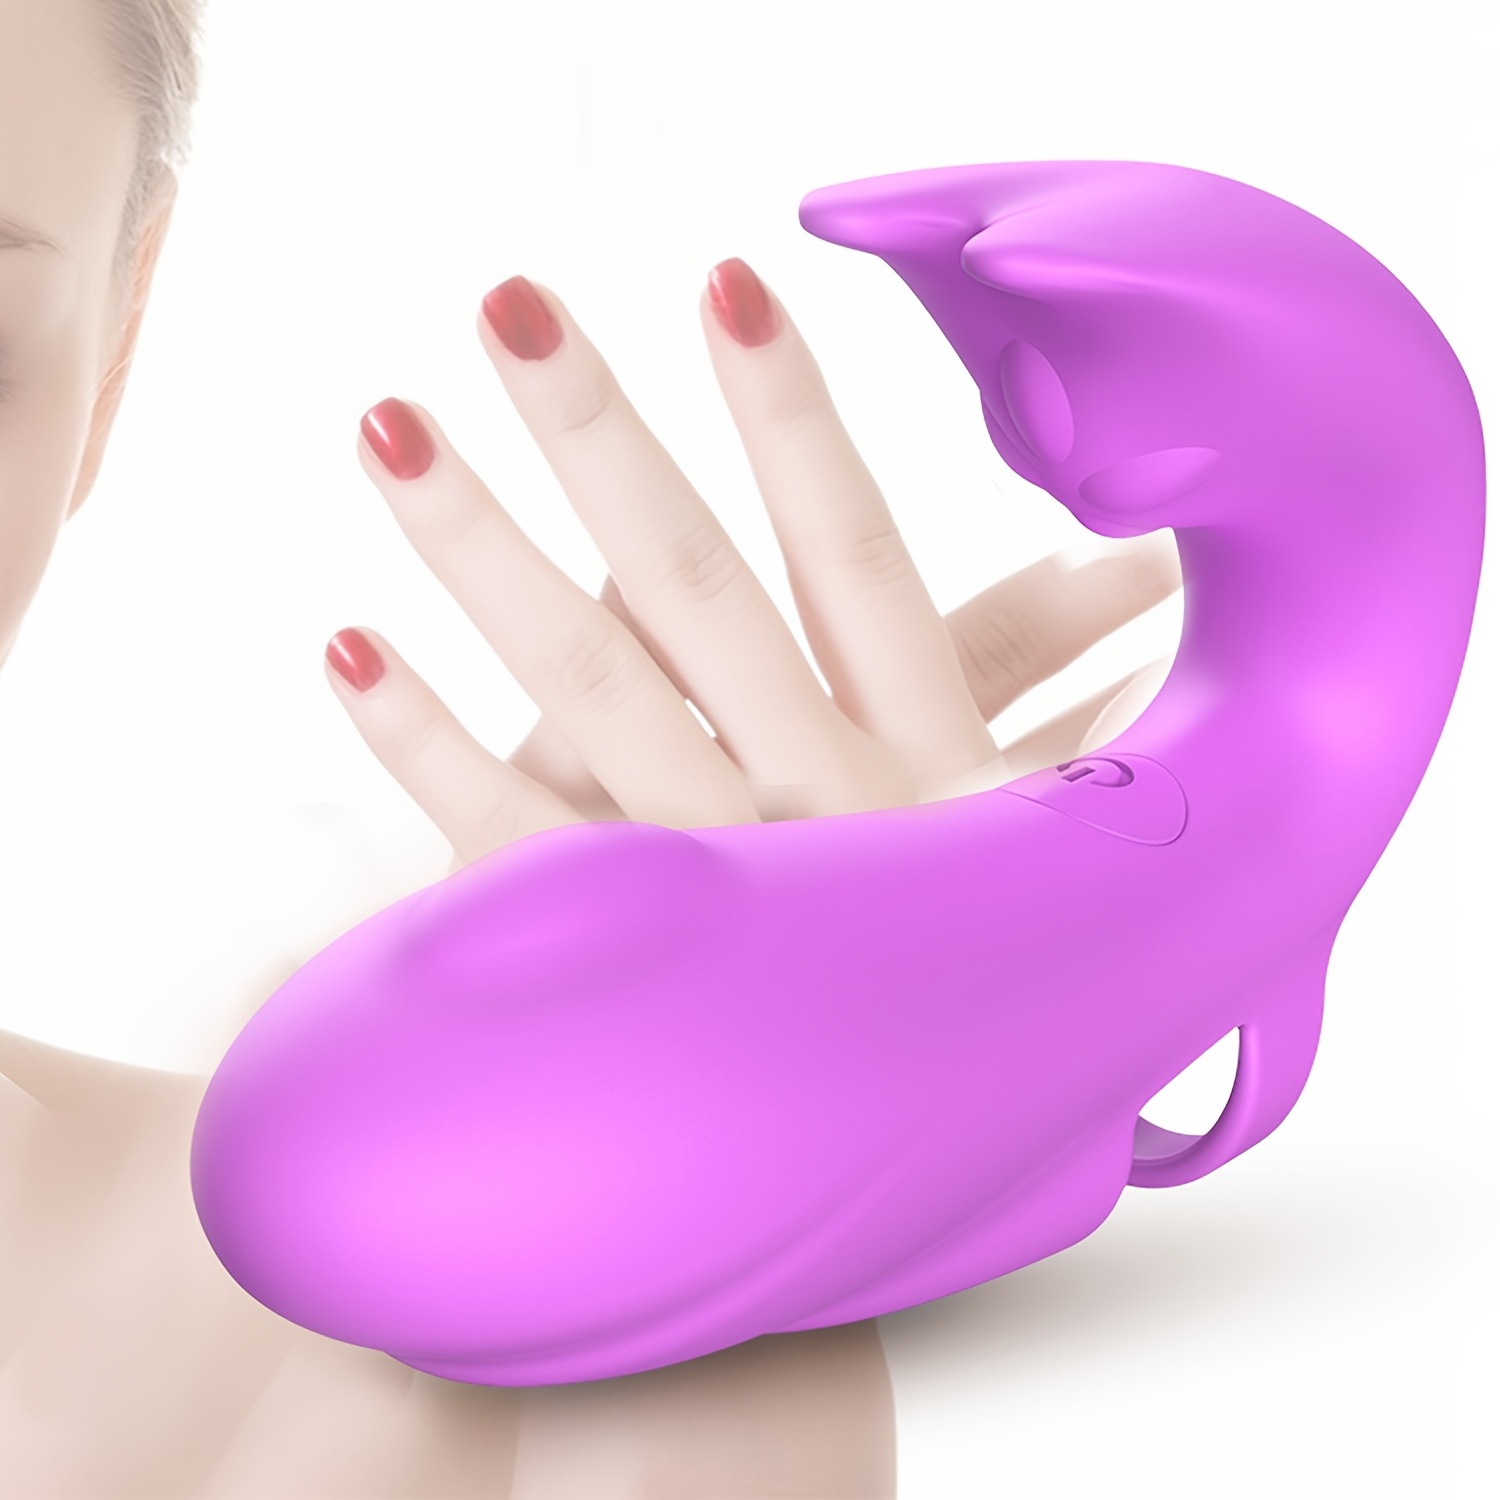 G Spot Finger Vibrator For Women With 7 Vibrations Modes, Discreet Personal Clitoral Vibrator Textured Tip For Double Intense Stimulation, Waterproof Mini Powerful Sex Toys For Couples,rechargeable, Nipples Vagina Massagers,purple picture